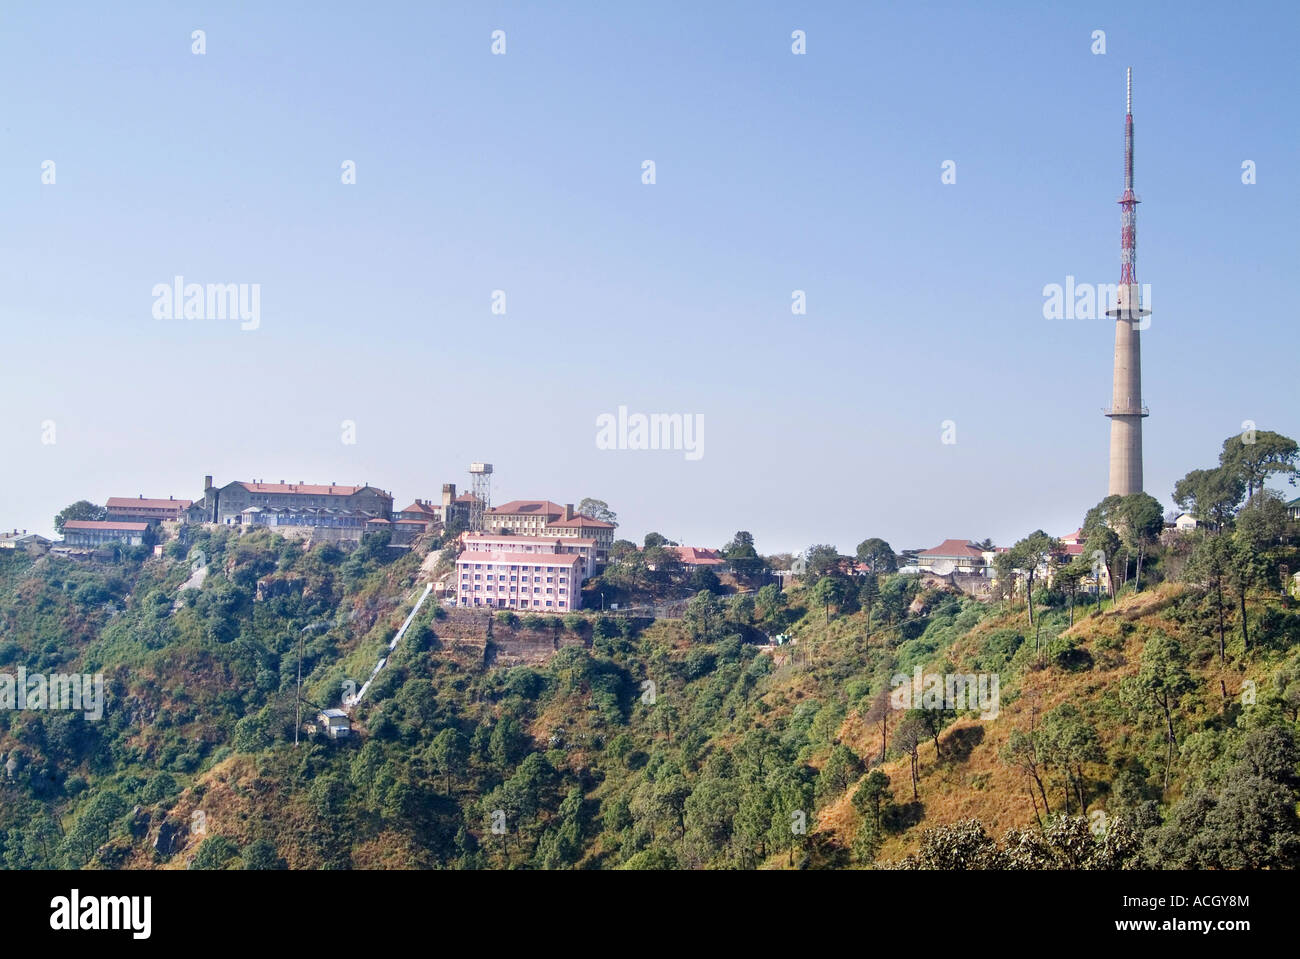 TELEVISION TRANSMISSION TOWER ON TOP OF A HILL Stock Photo